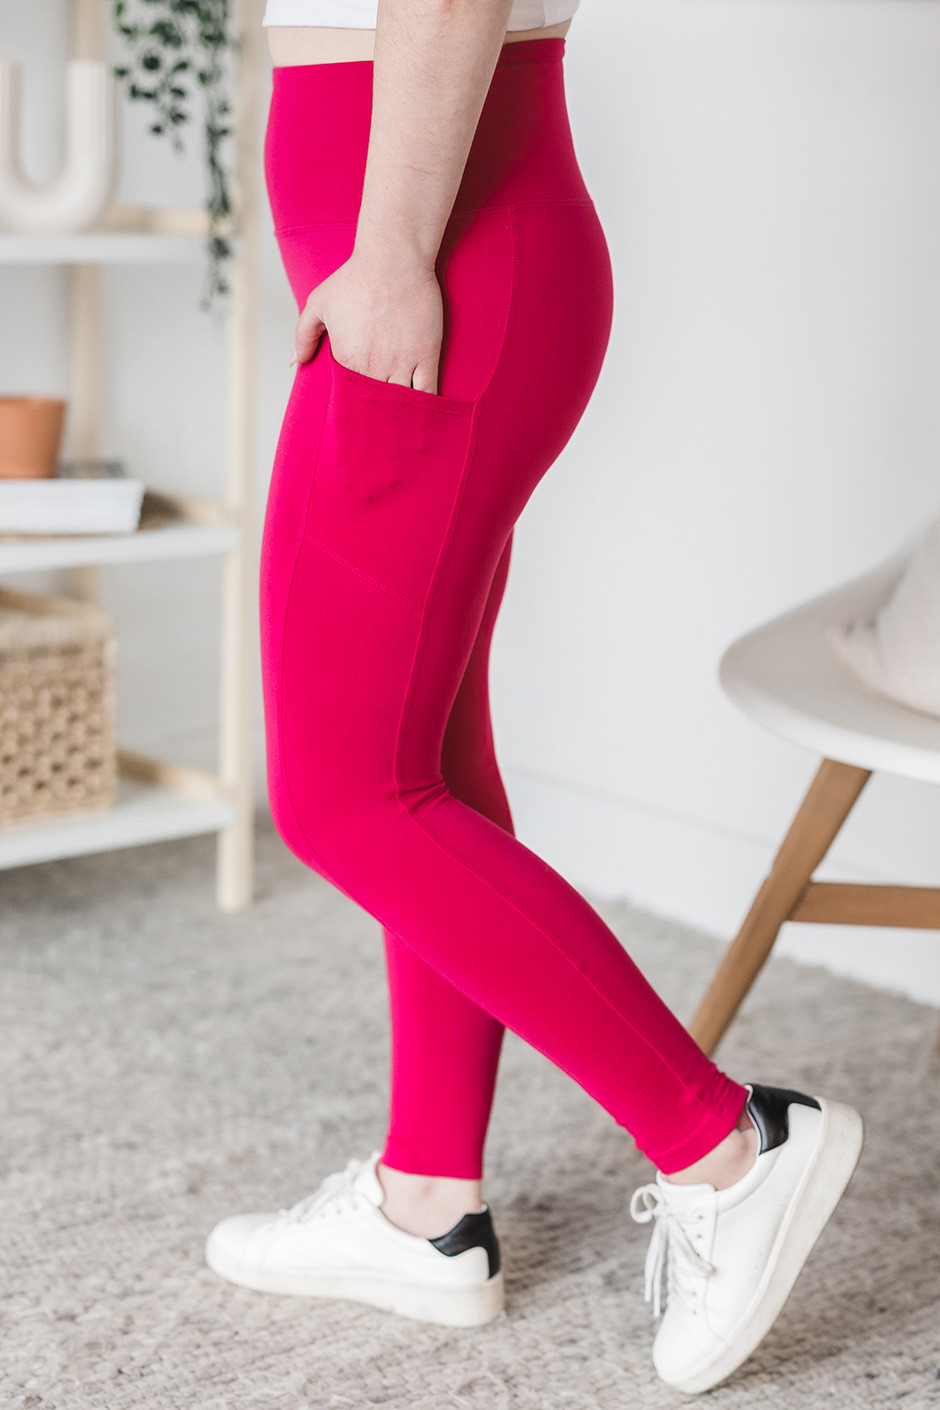 Pristine Pocket Leggings  CRANBERRY by Obsession Shapewear - East